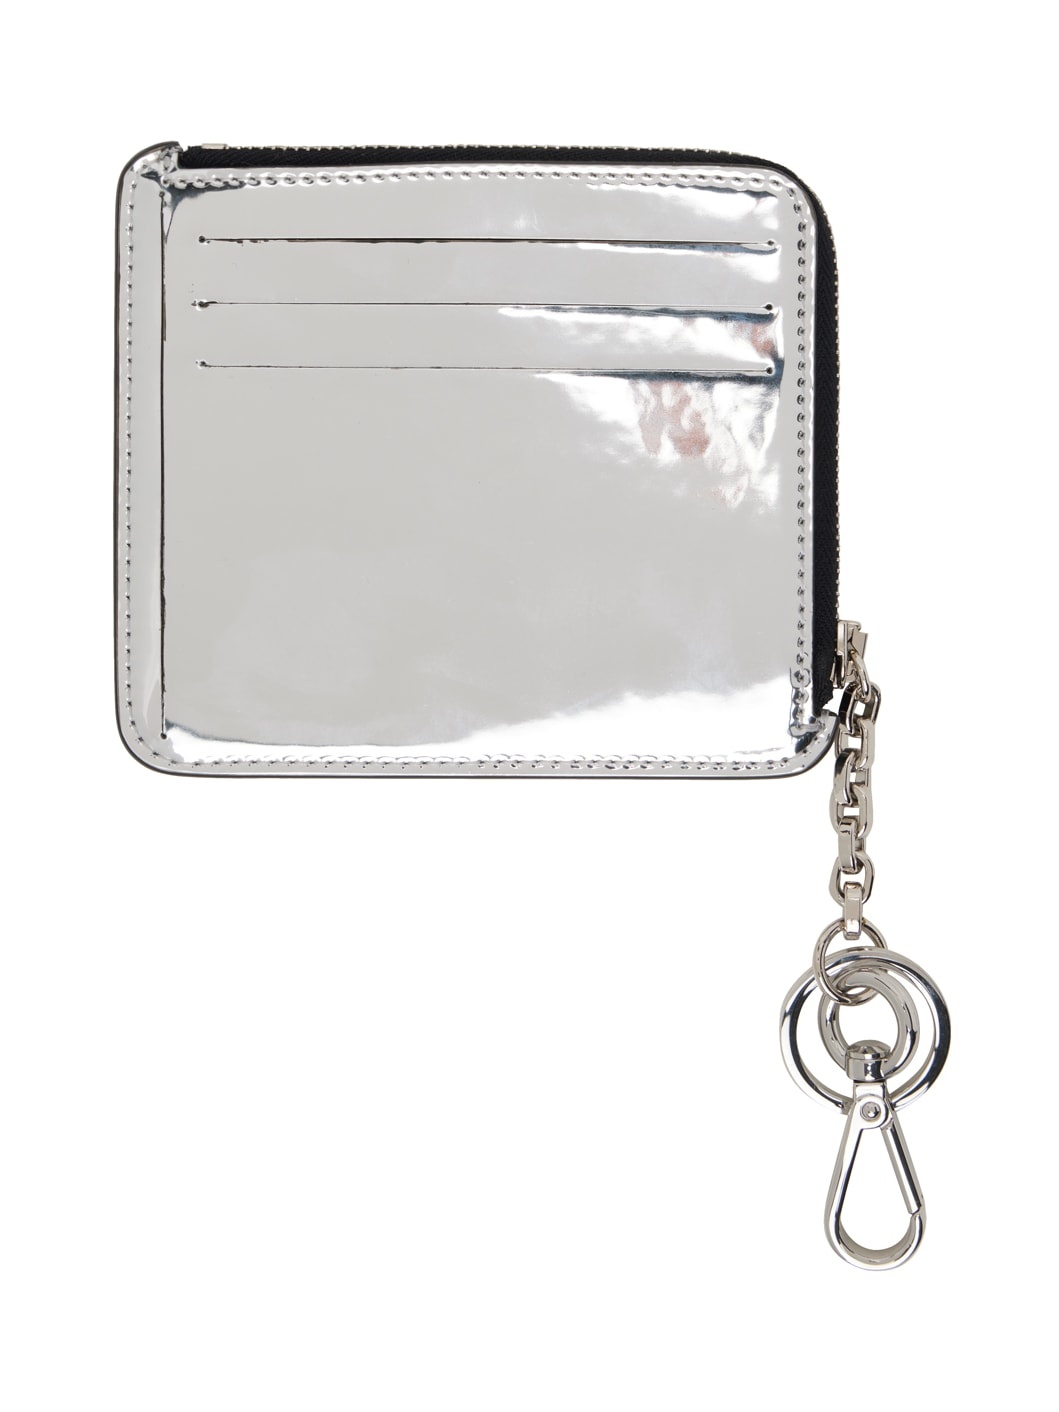 Silver Faux-Leather Wallet - 2